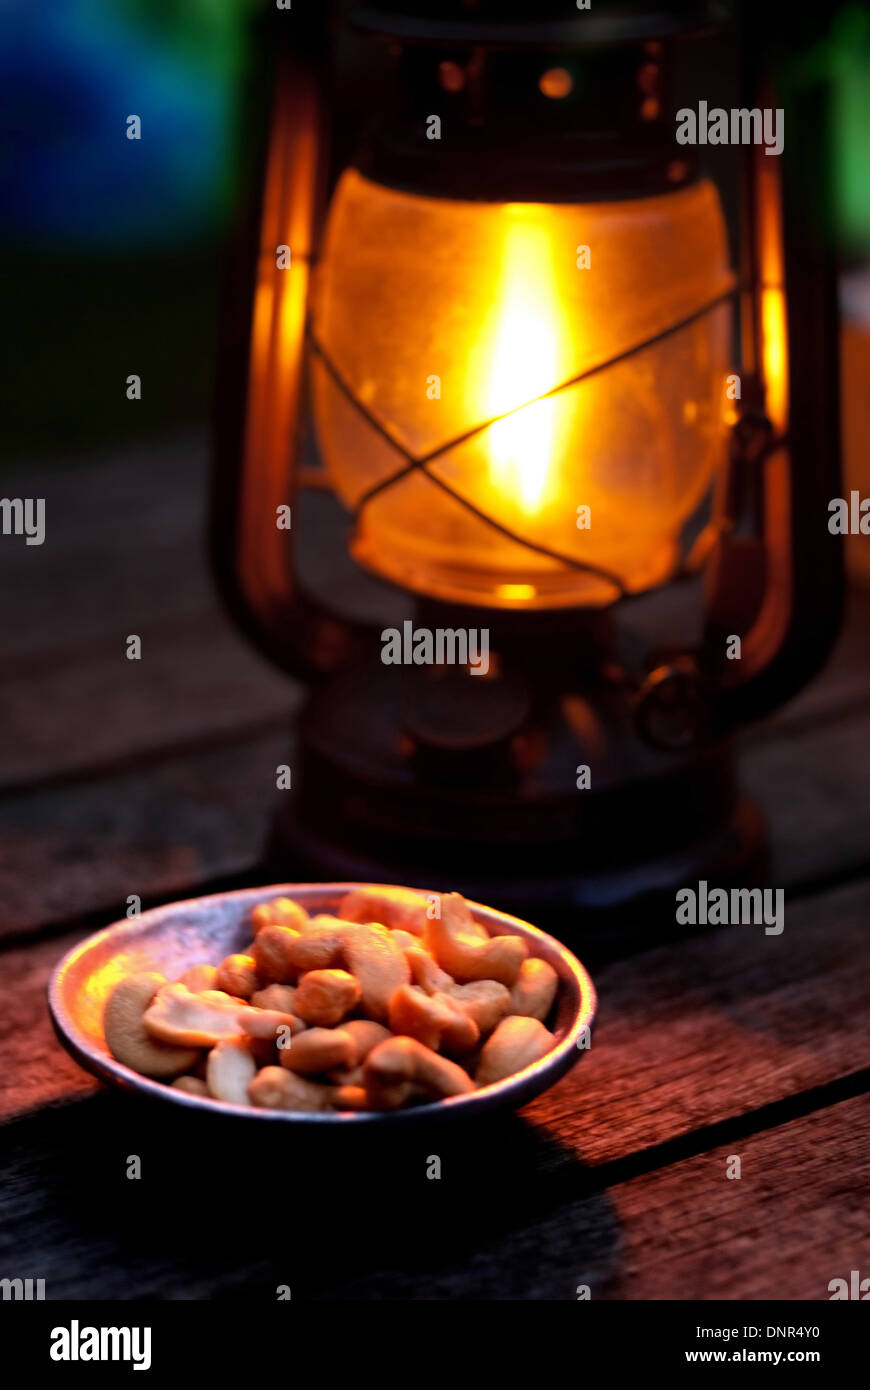 Page 5 - Heat Lamp Food High Resolution Stock Photography and Images - Alamy